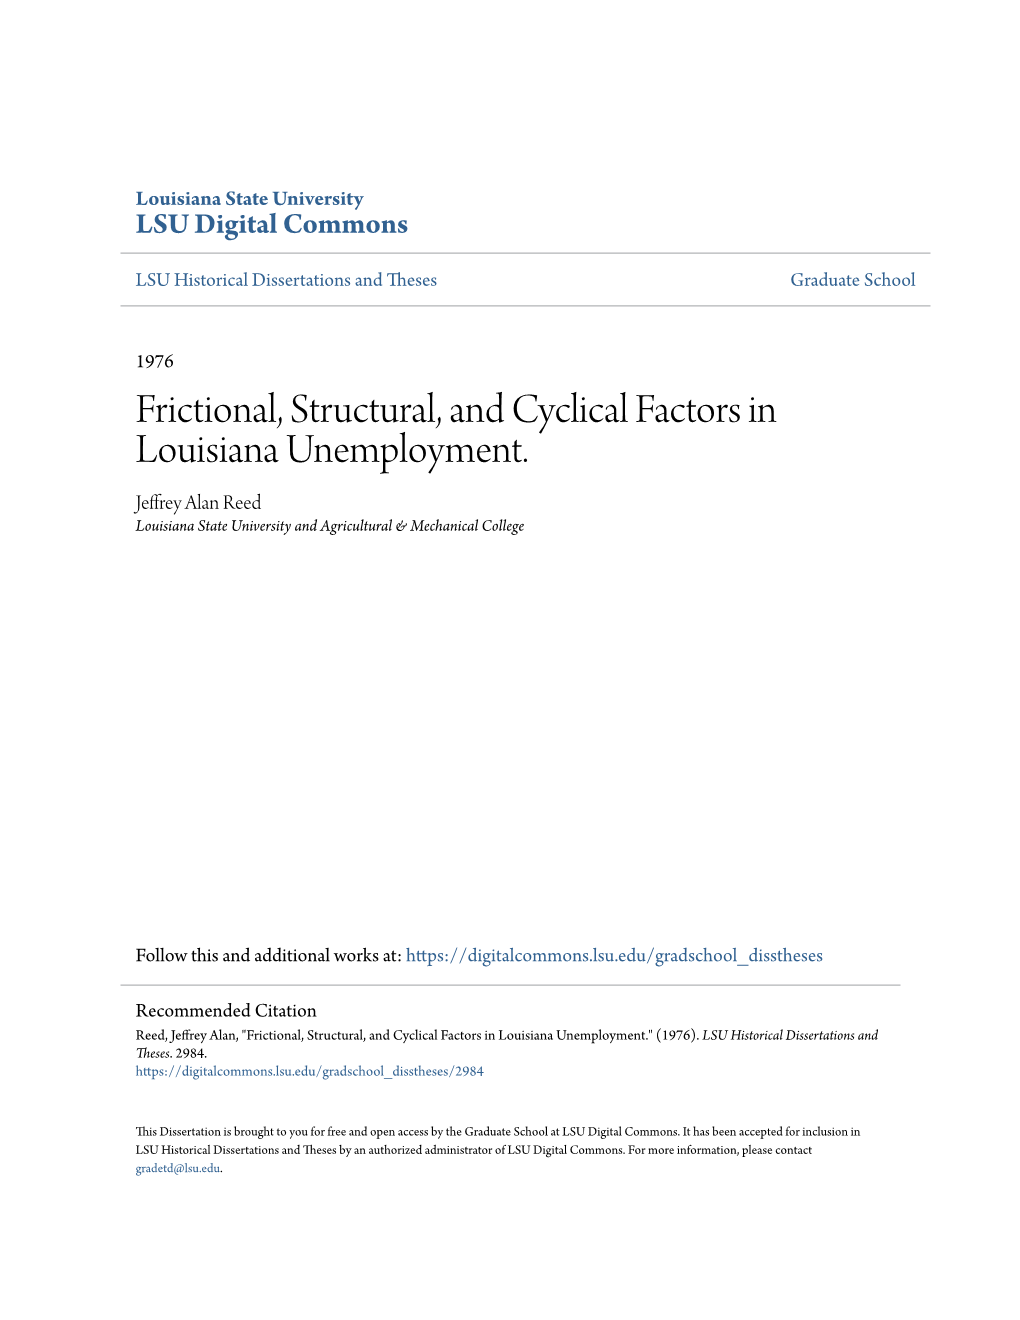 Frictional, Structural, and Cyclical Factors in Louisiana Unemployment. Jeffrey Alan Reed Louisiana State University and Agricultural & Mechanical College